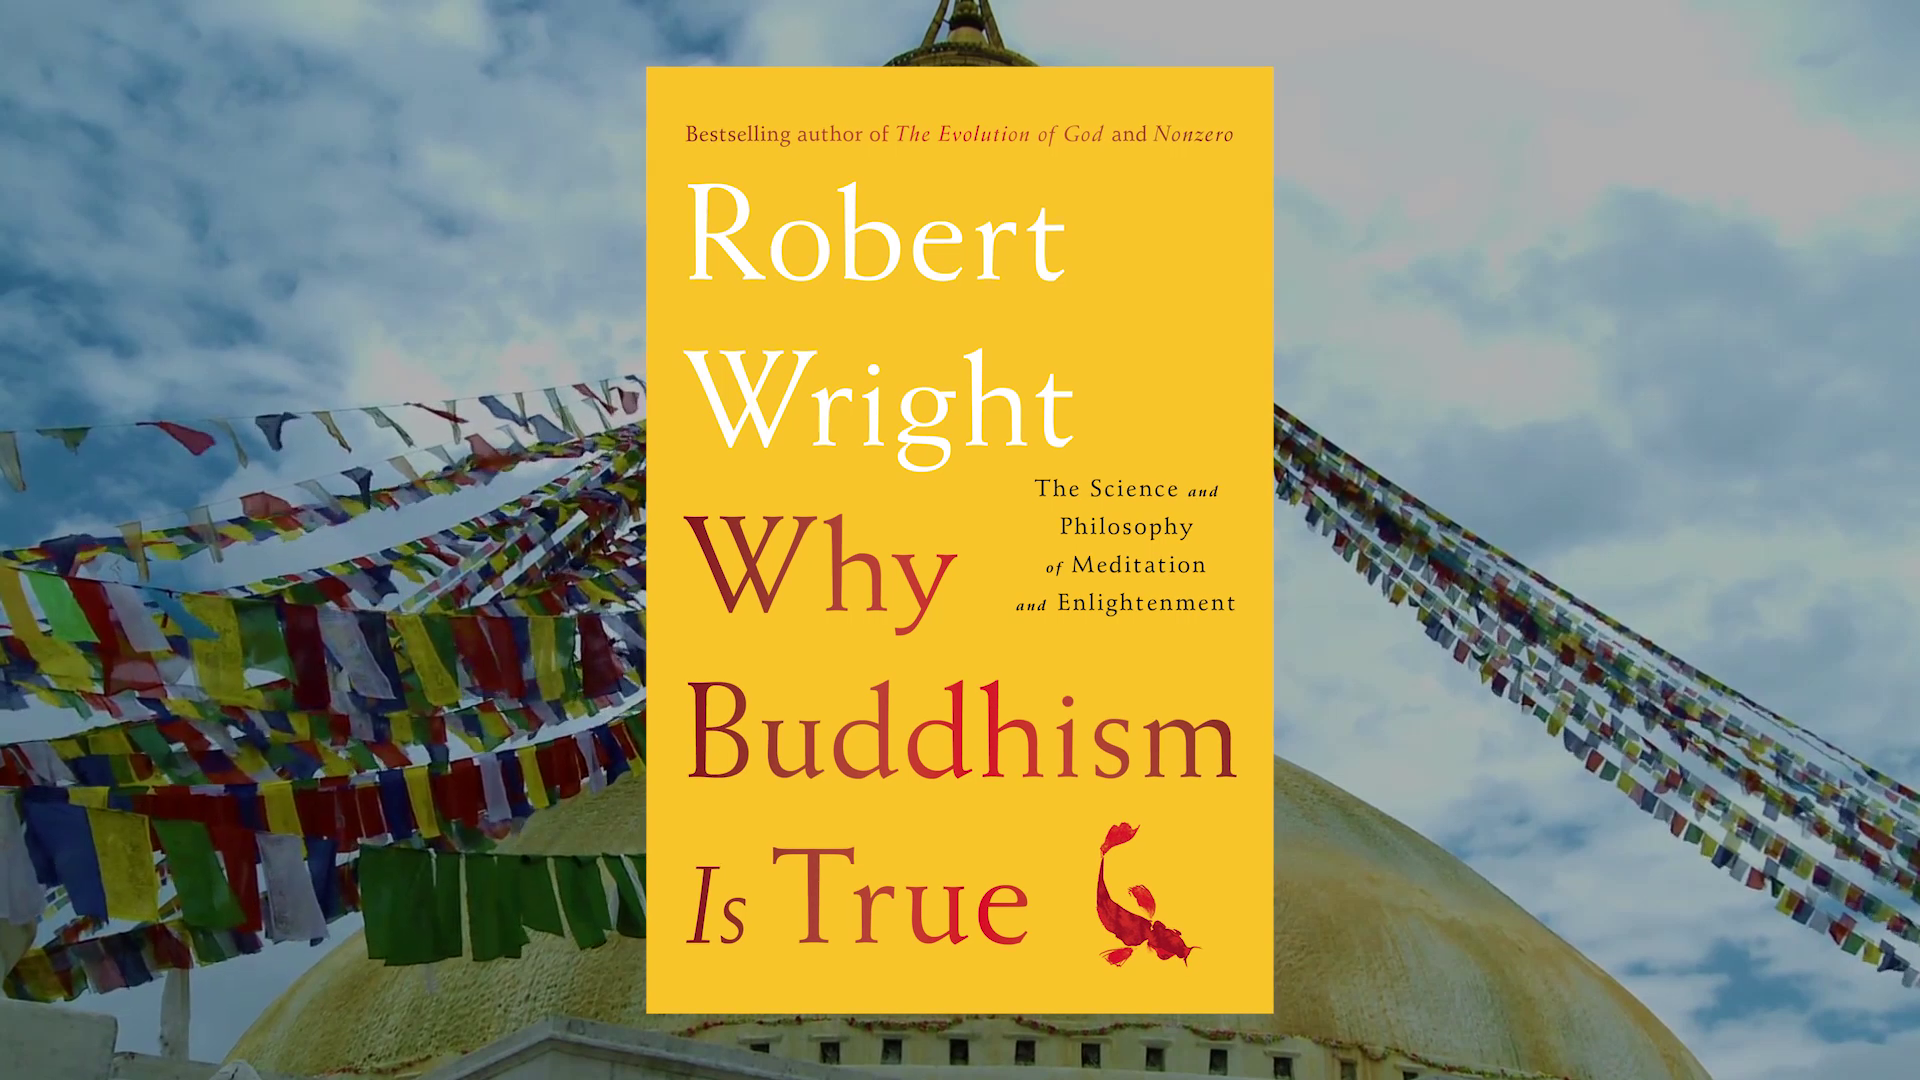 Robert Wright’s Why Buddhism Is True